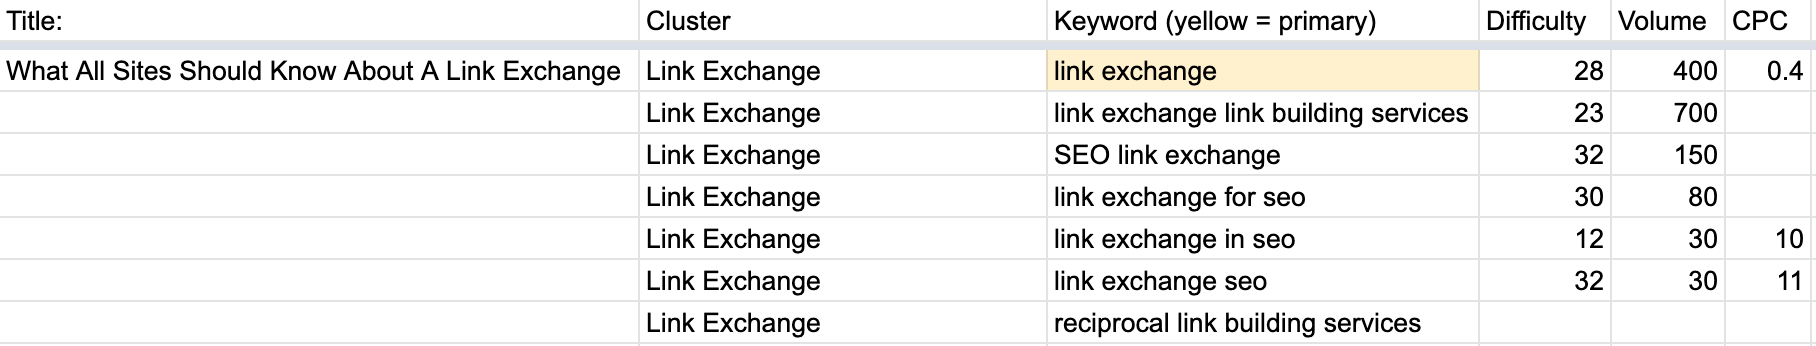 Using Google Spreadsheets to identify keyword clusters for Semantic SEO strategy